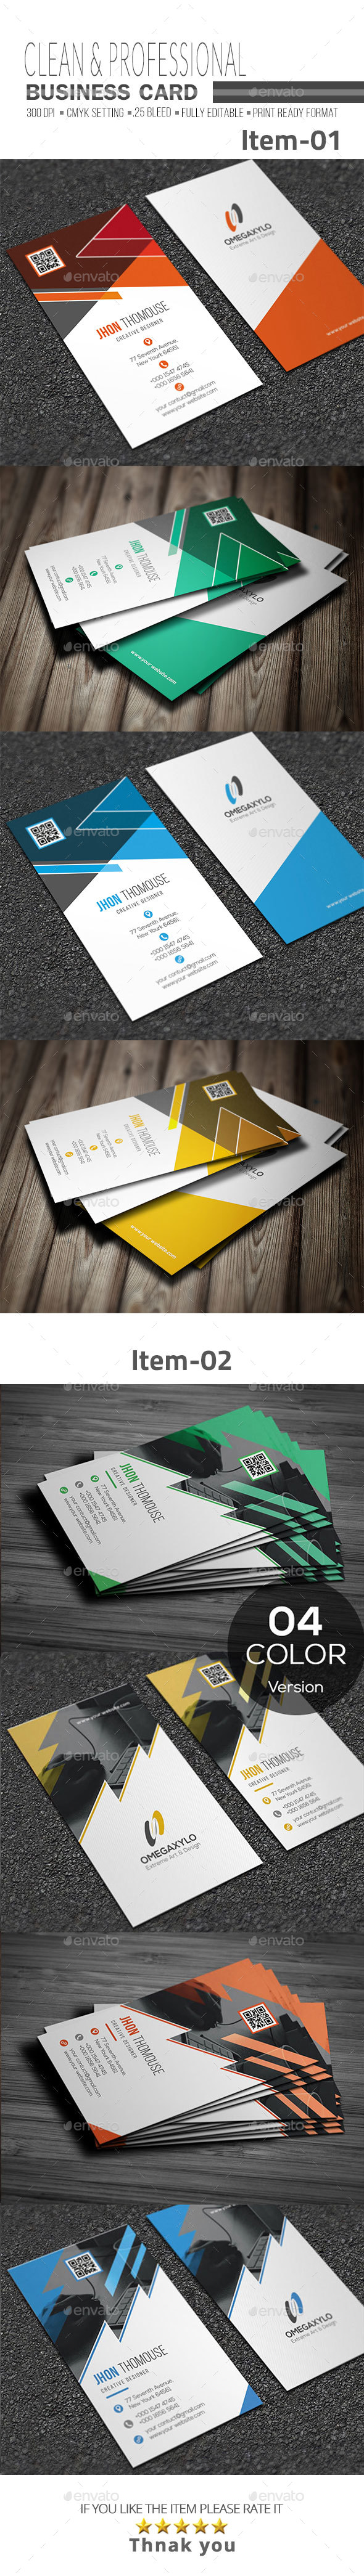 GraphicRiver Business Card Bundle 2 In 1 21127454